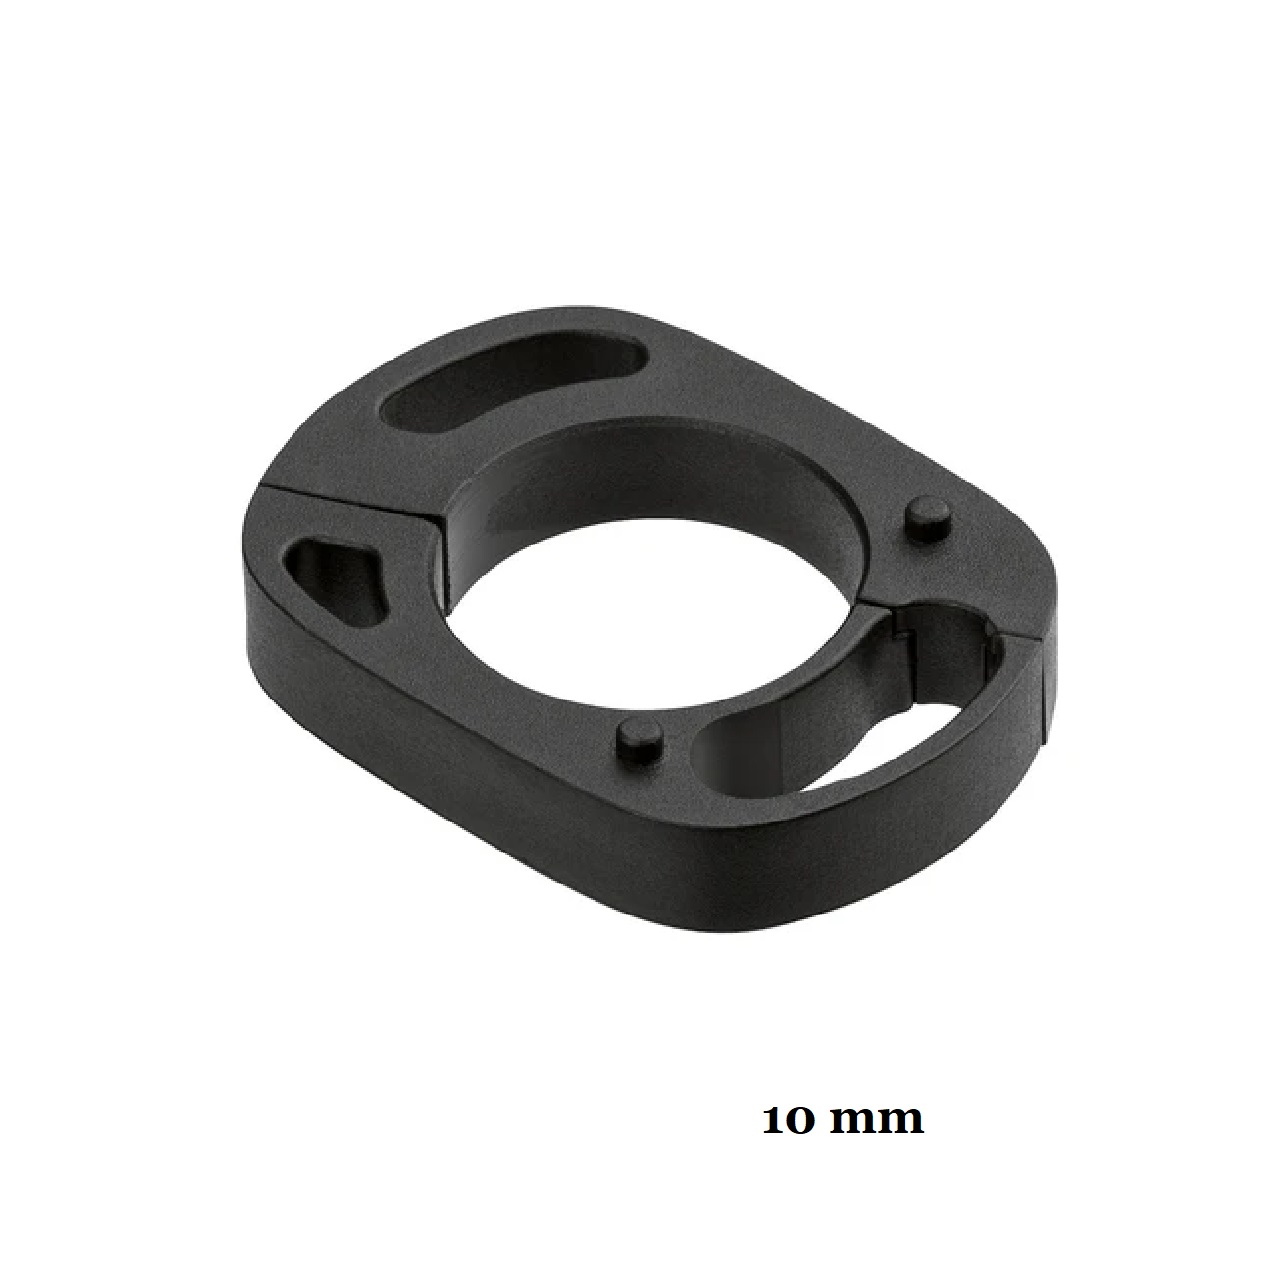 FSA or Vision ACR Stem Spacer 10mm Fits ACR Stems ONLY!